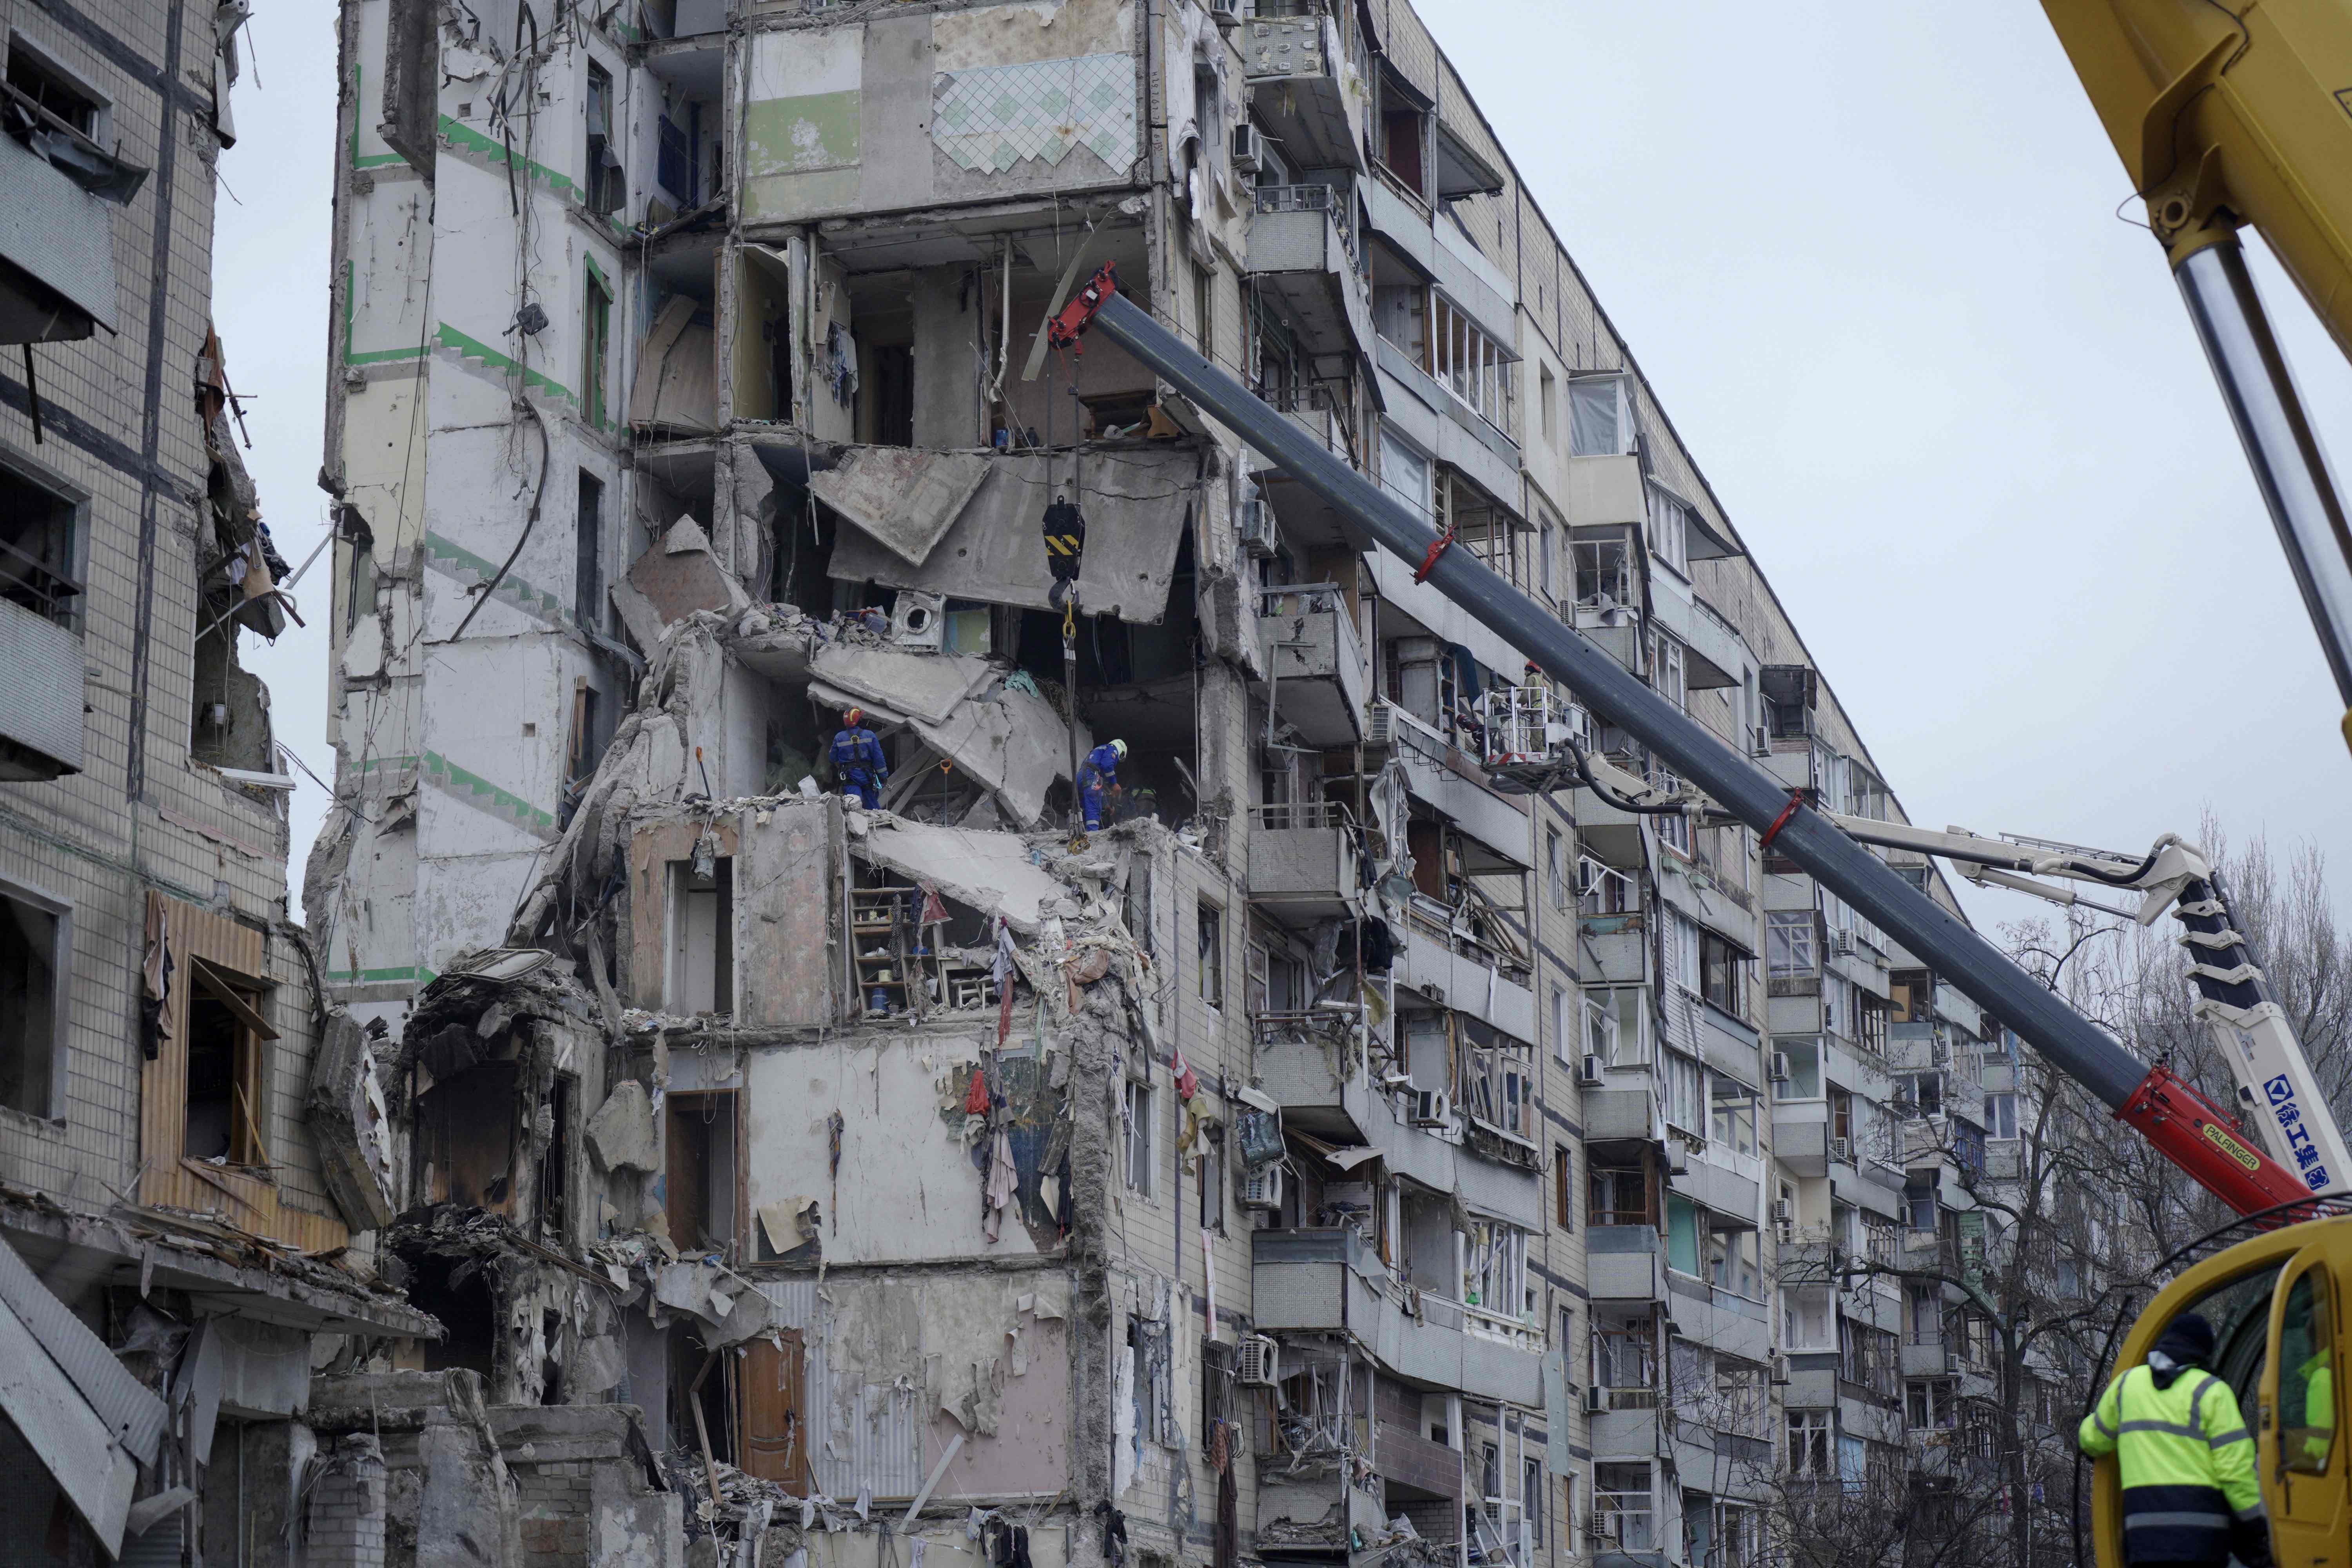 Rescuers work around the apartment building destroyed by a Russian missile strike